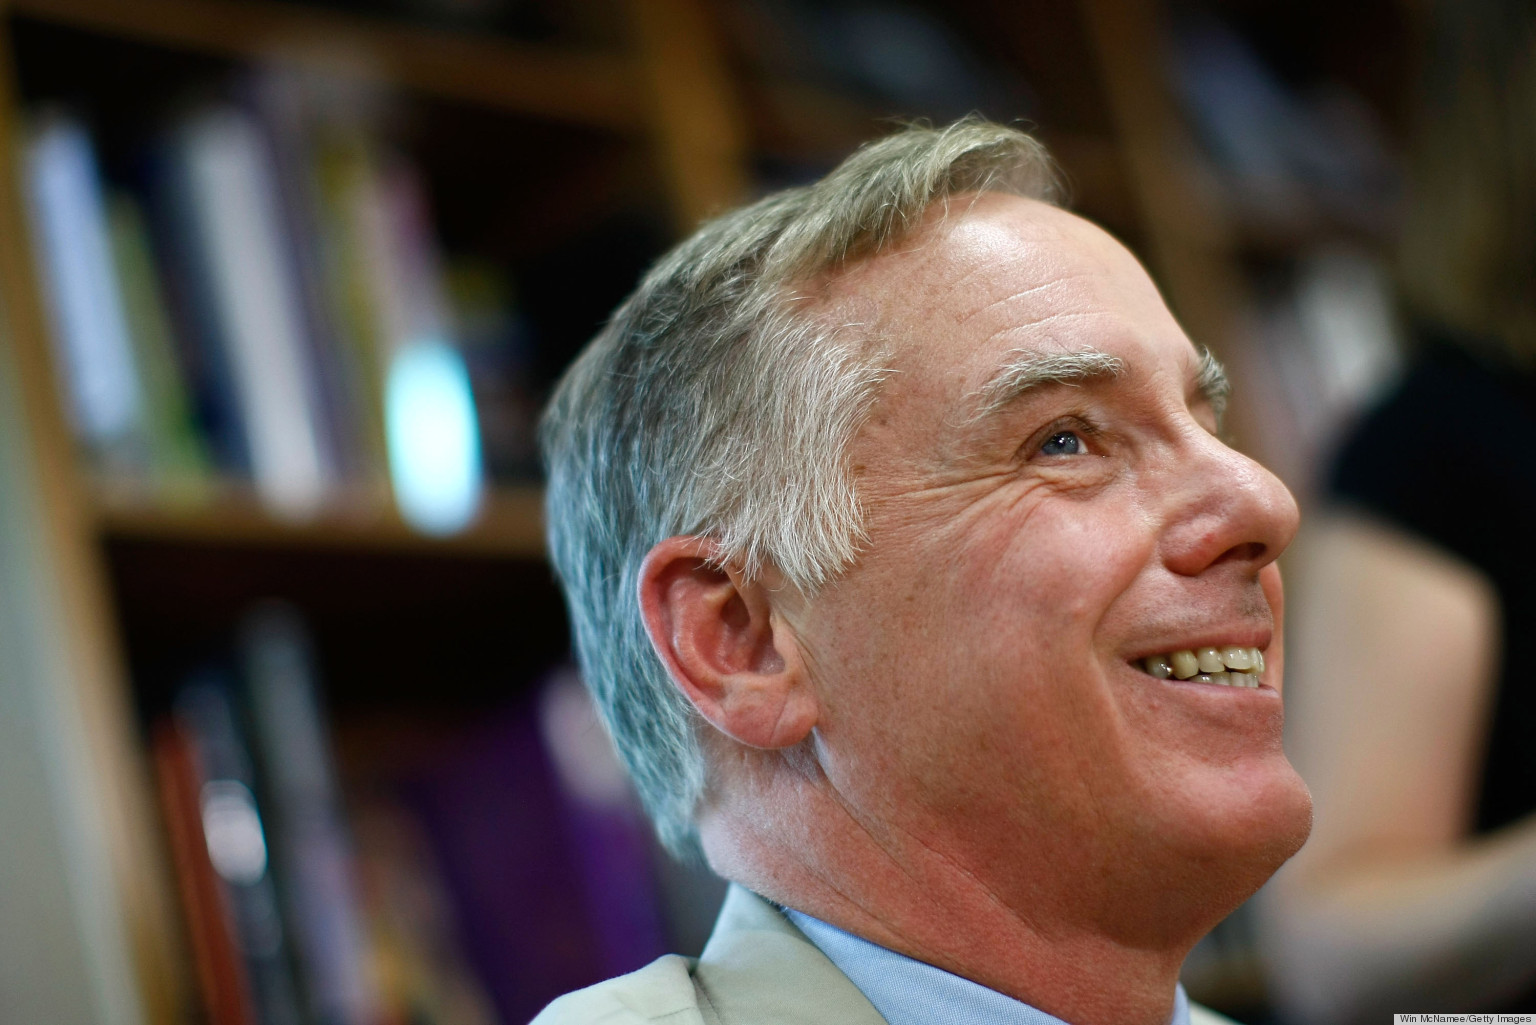 Howard Dean on the Evolution of LGBT Rights, the Republican Party and